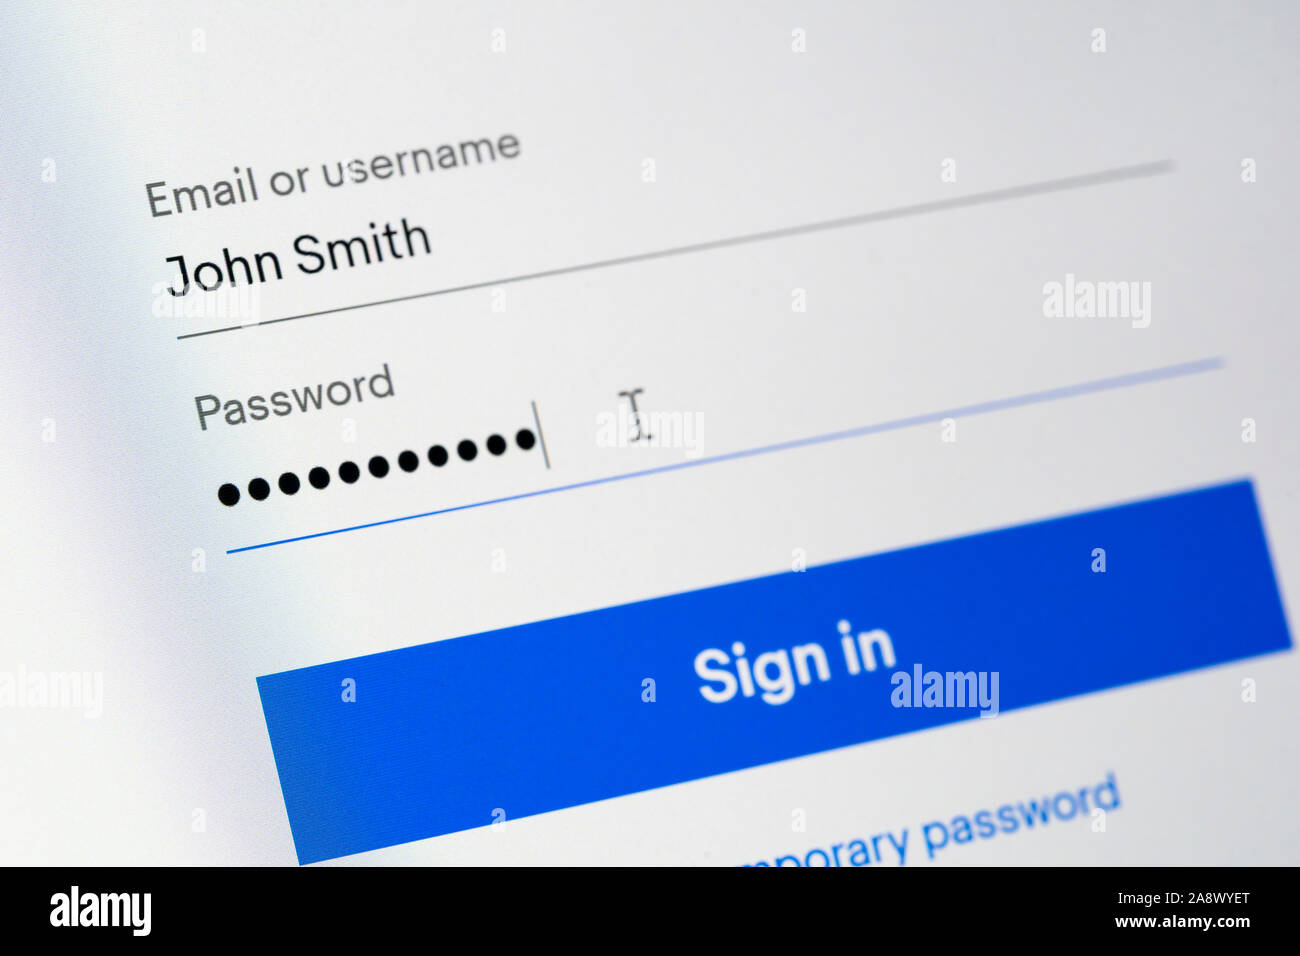 A log in screen requiring a username or email address and a password, with a sign in button. The username given is John Smith. United Kingdom Stock Photo